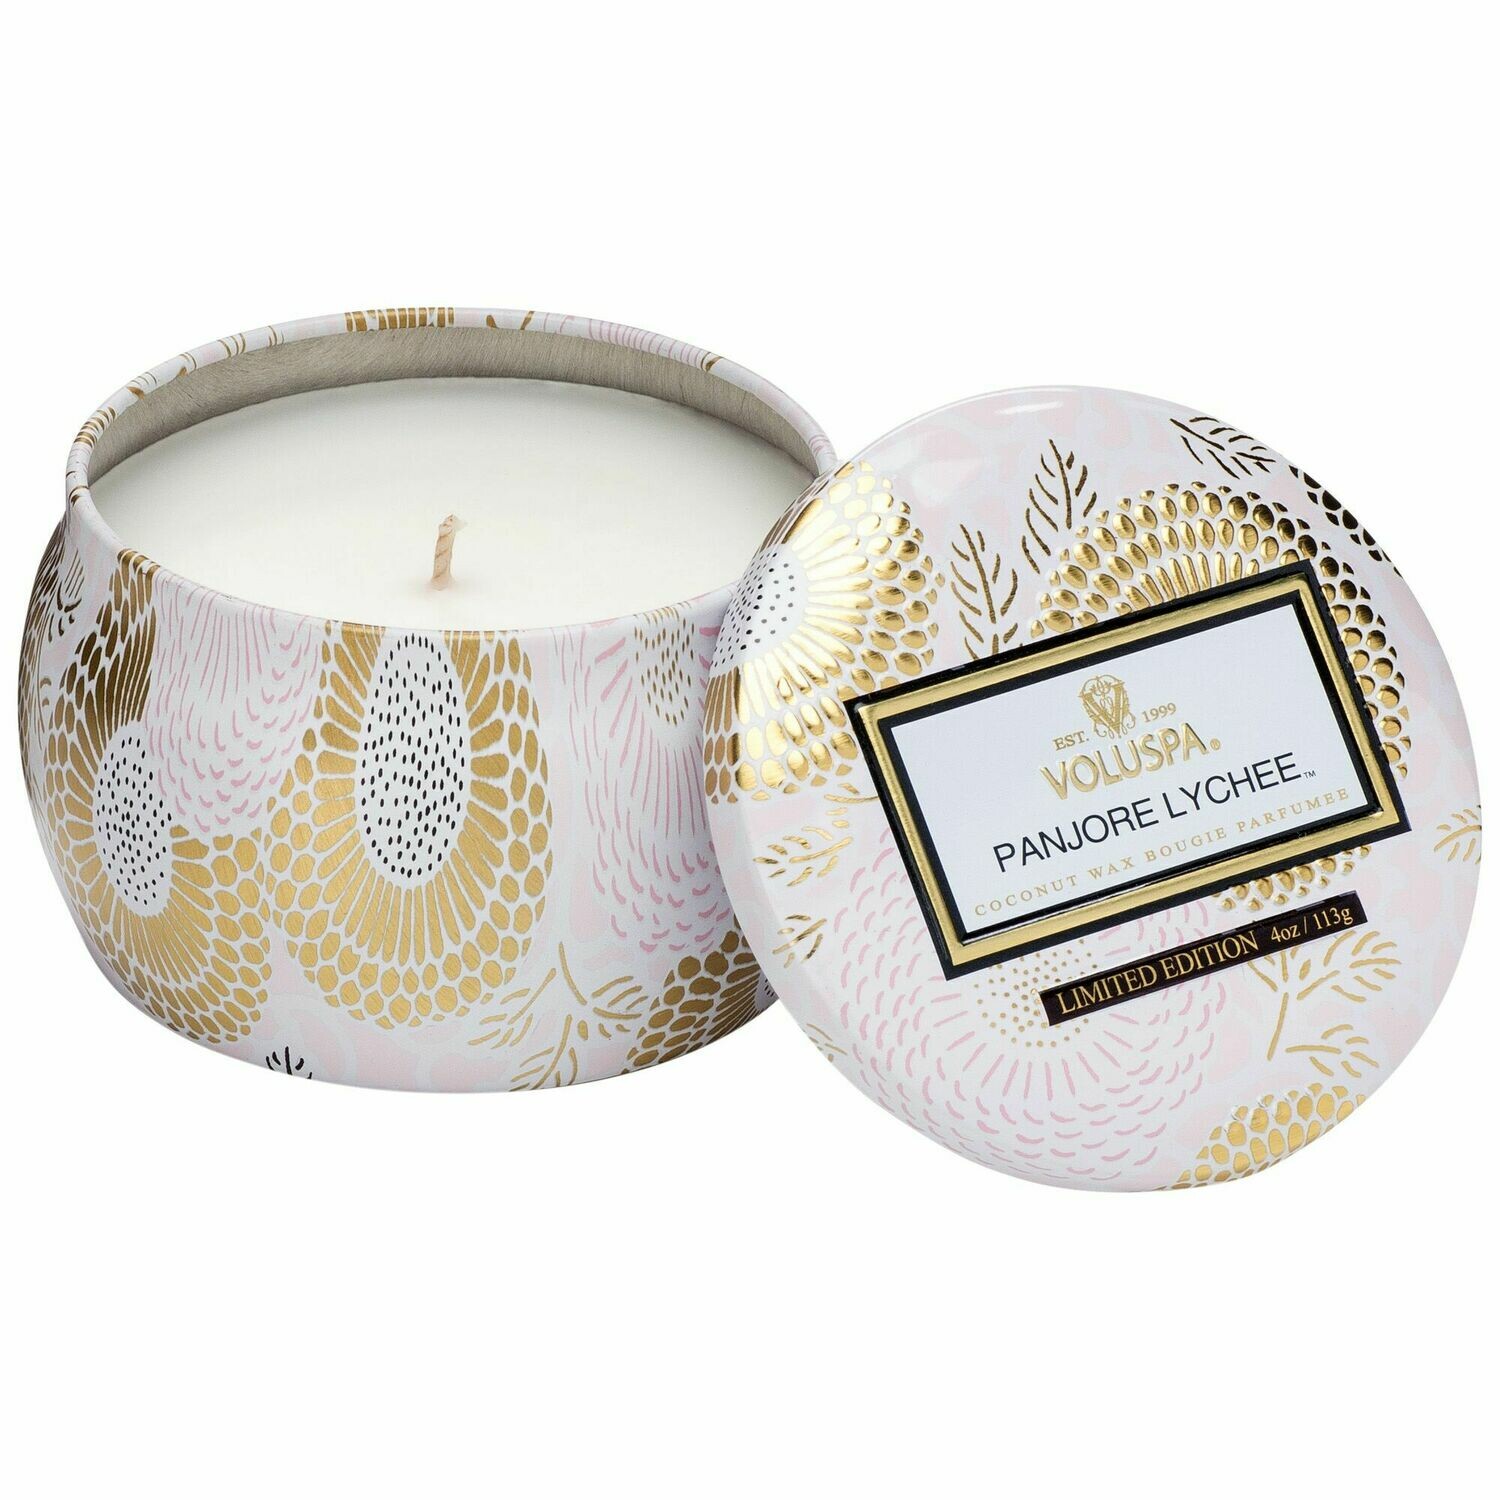 Panjore Lychee Candle - Voluspa Petite Tin Candle